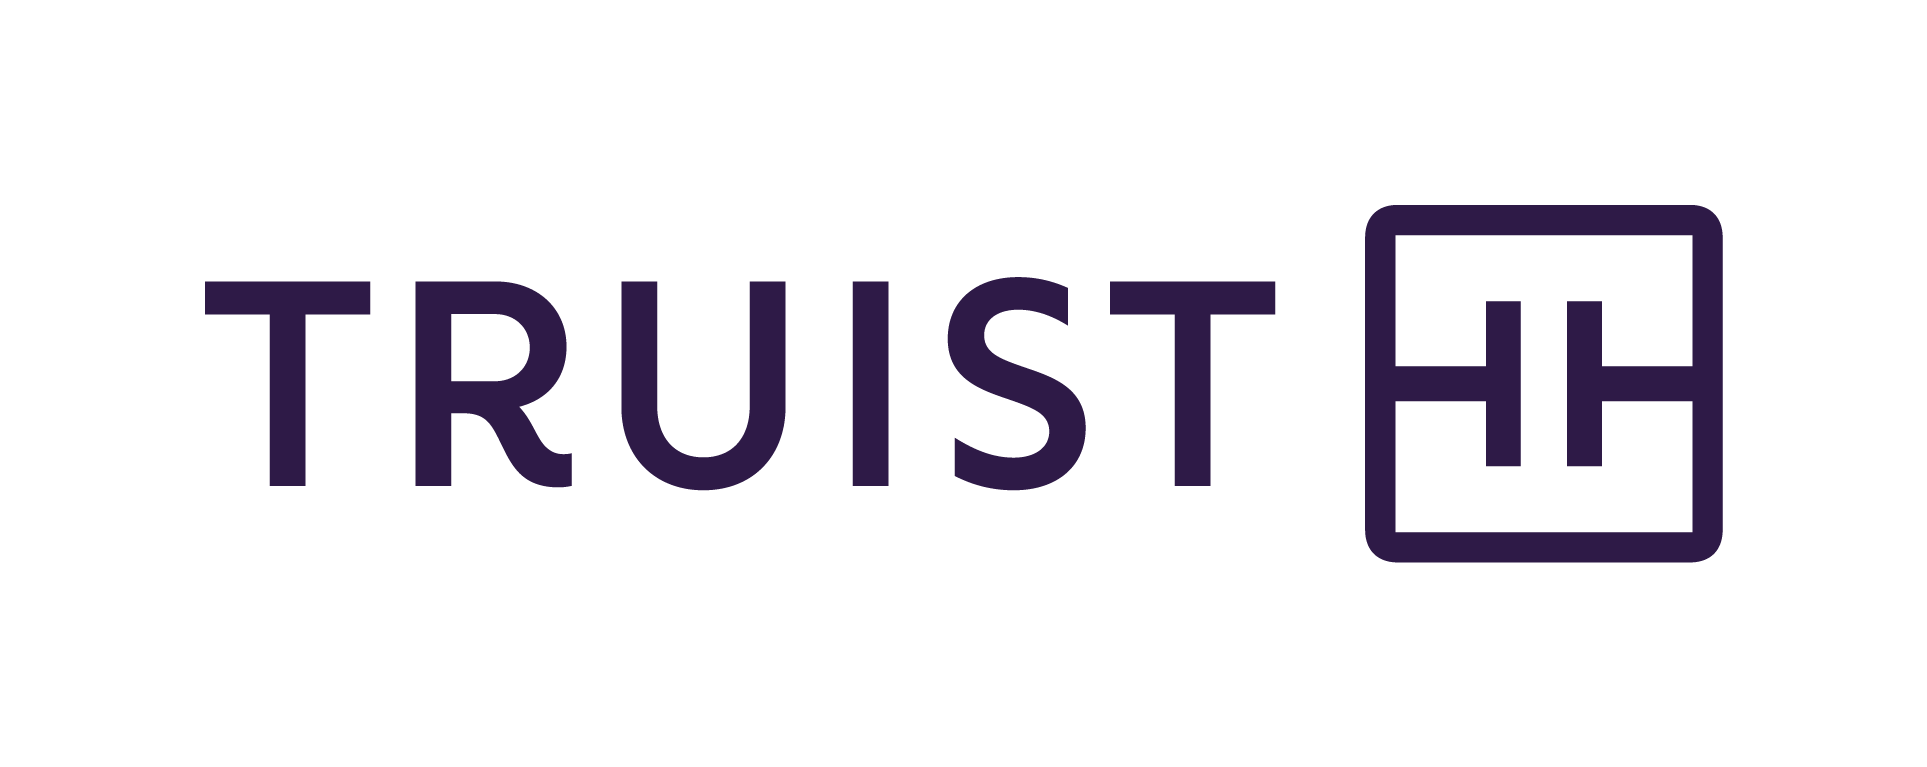 truist-logo-png-1.png